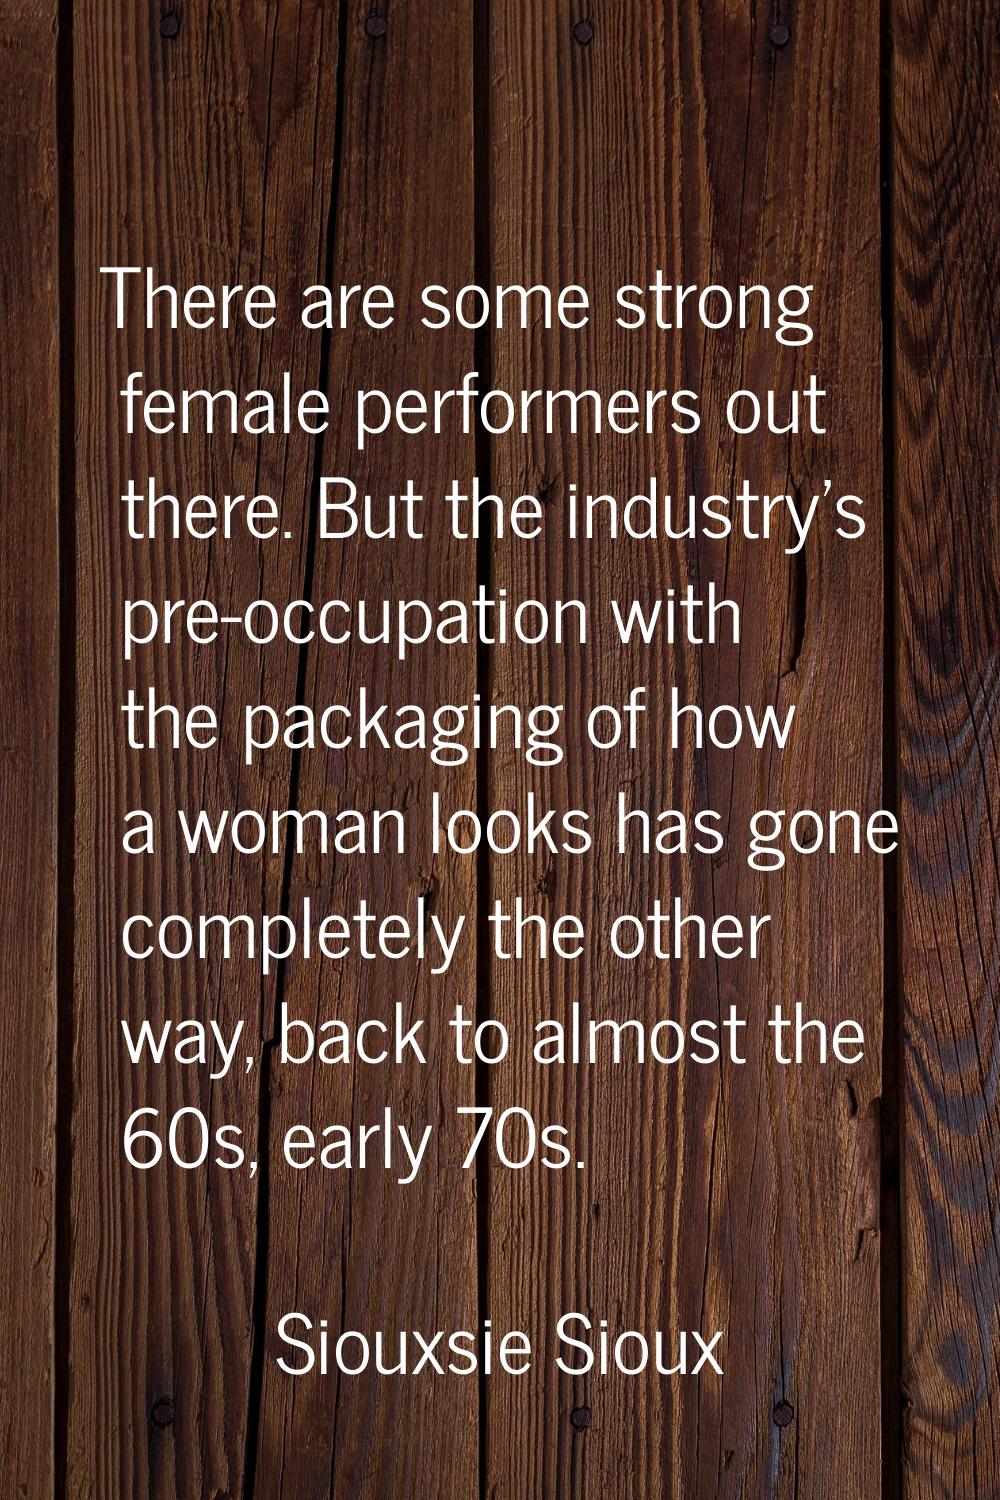 There are some strong female performers out there. But the industry's pre-occupation with the packa